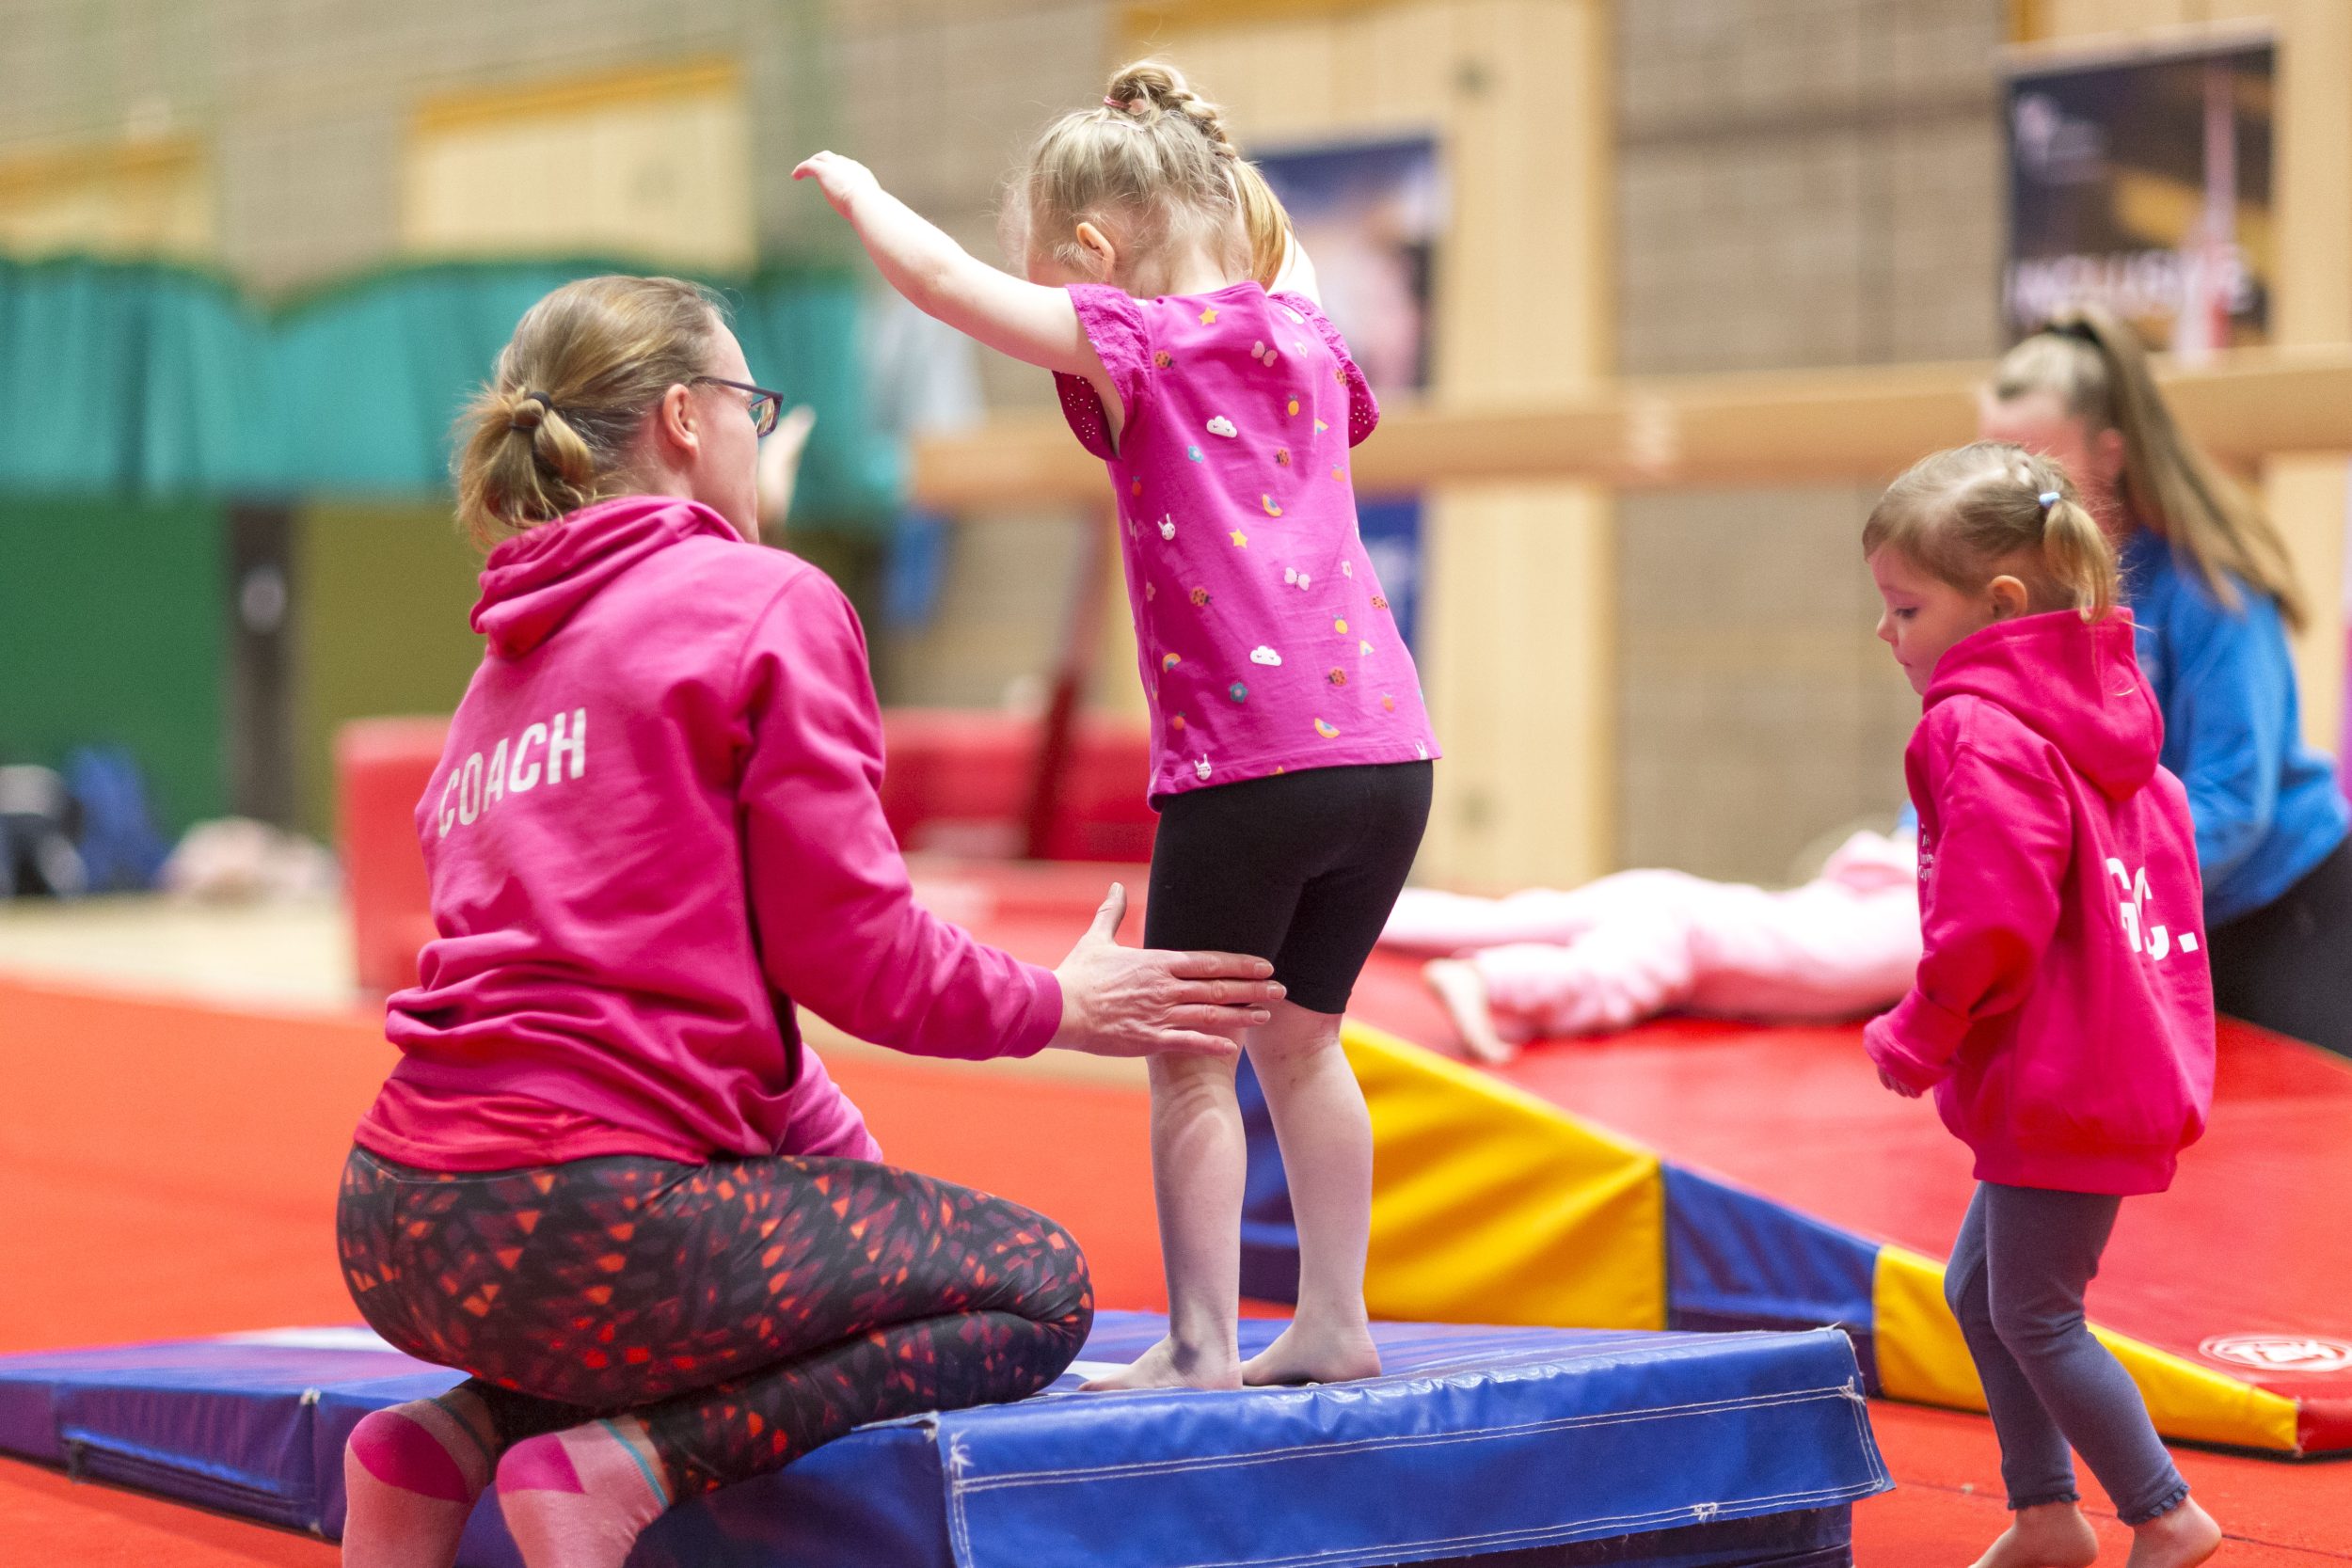 A coach prepares to suport a young gymnast practicing a skill during a pre-school gymnastics class